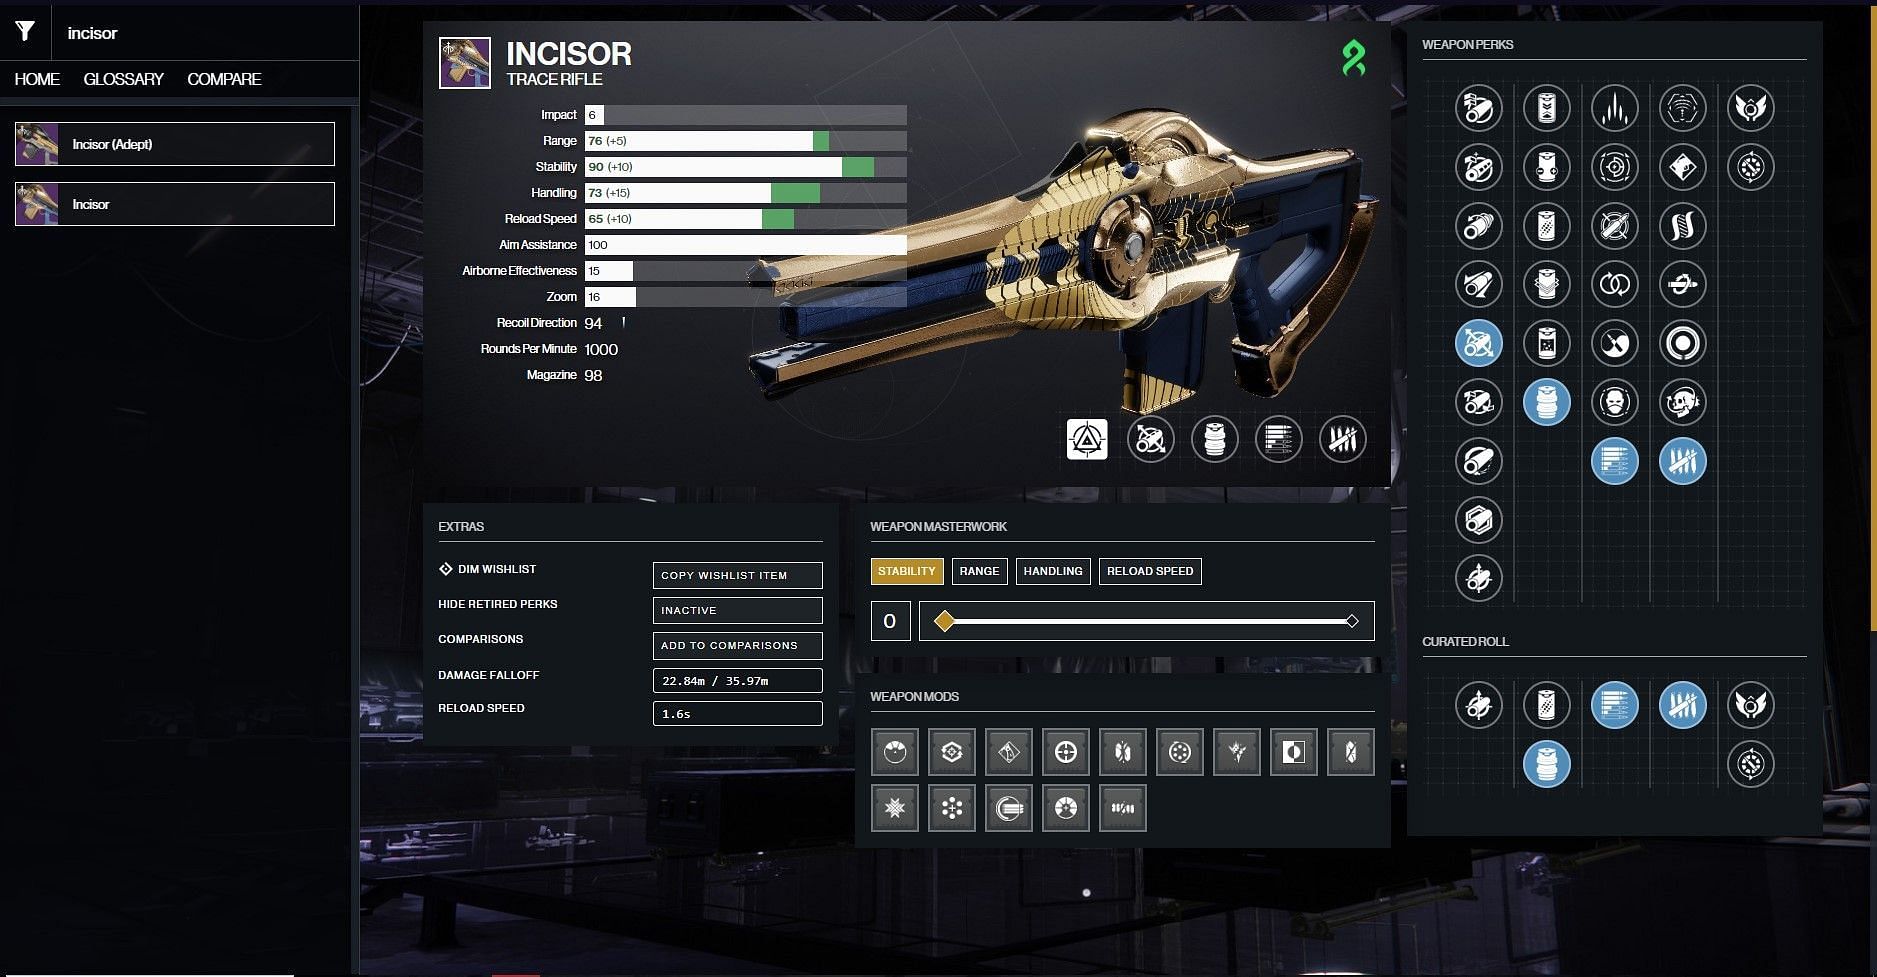 Incisor PvE god roll for add-clearing (Image via D2Gunsmith)